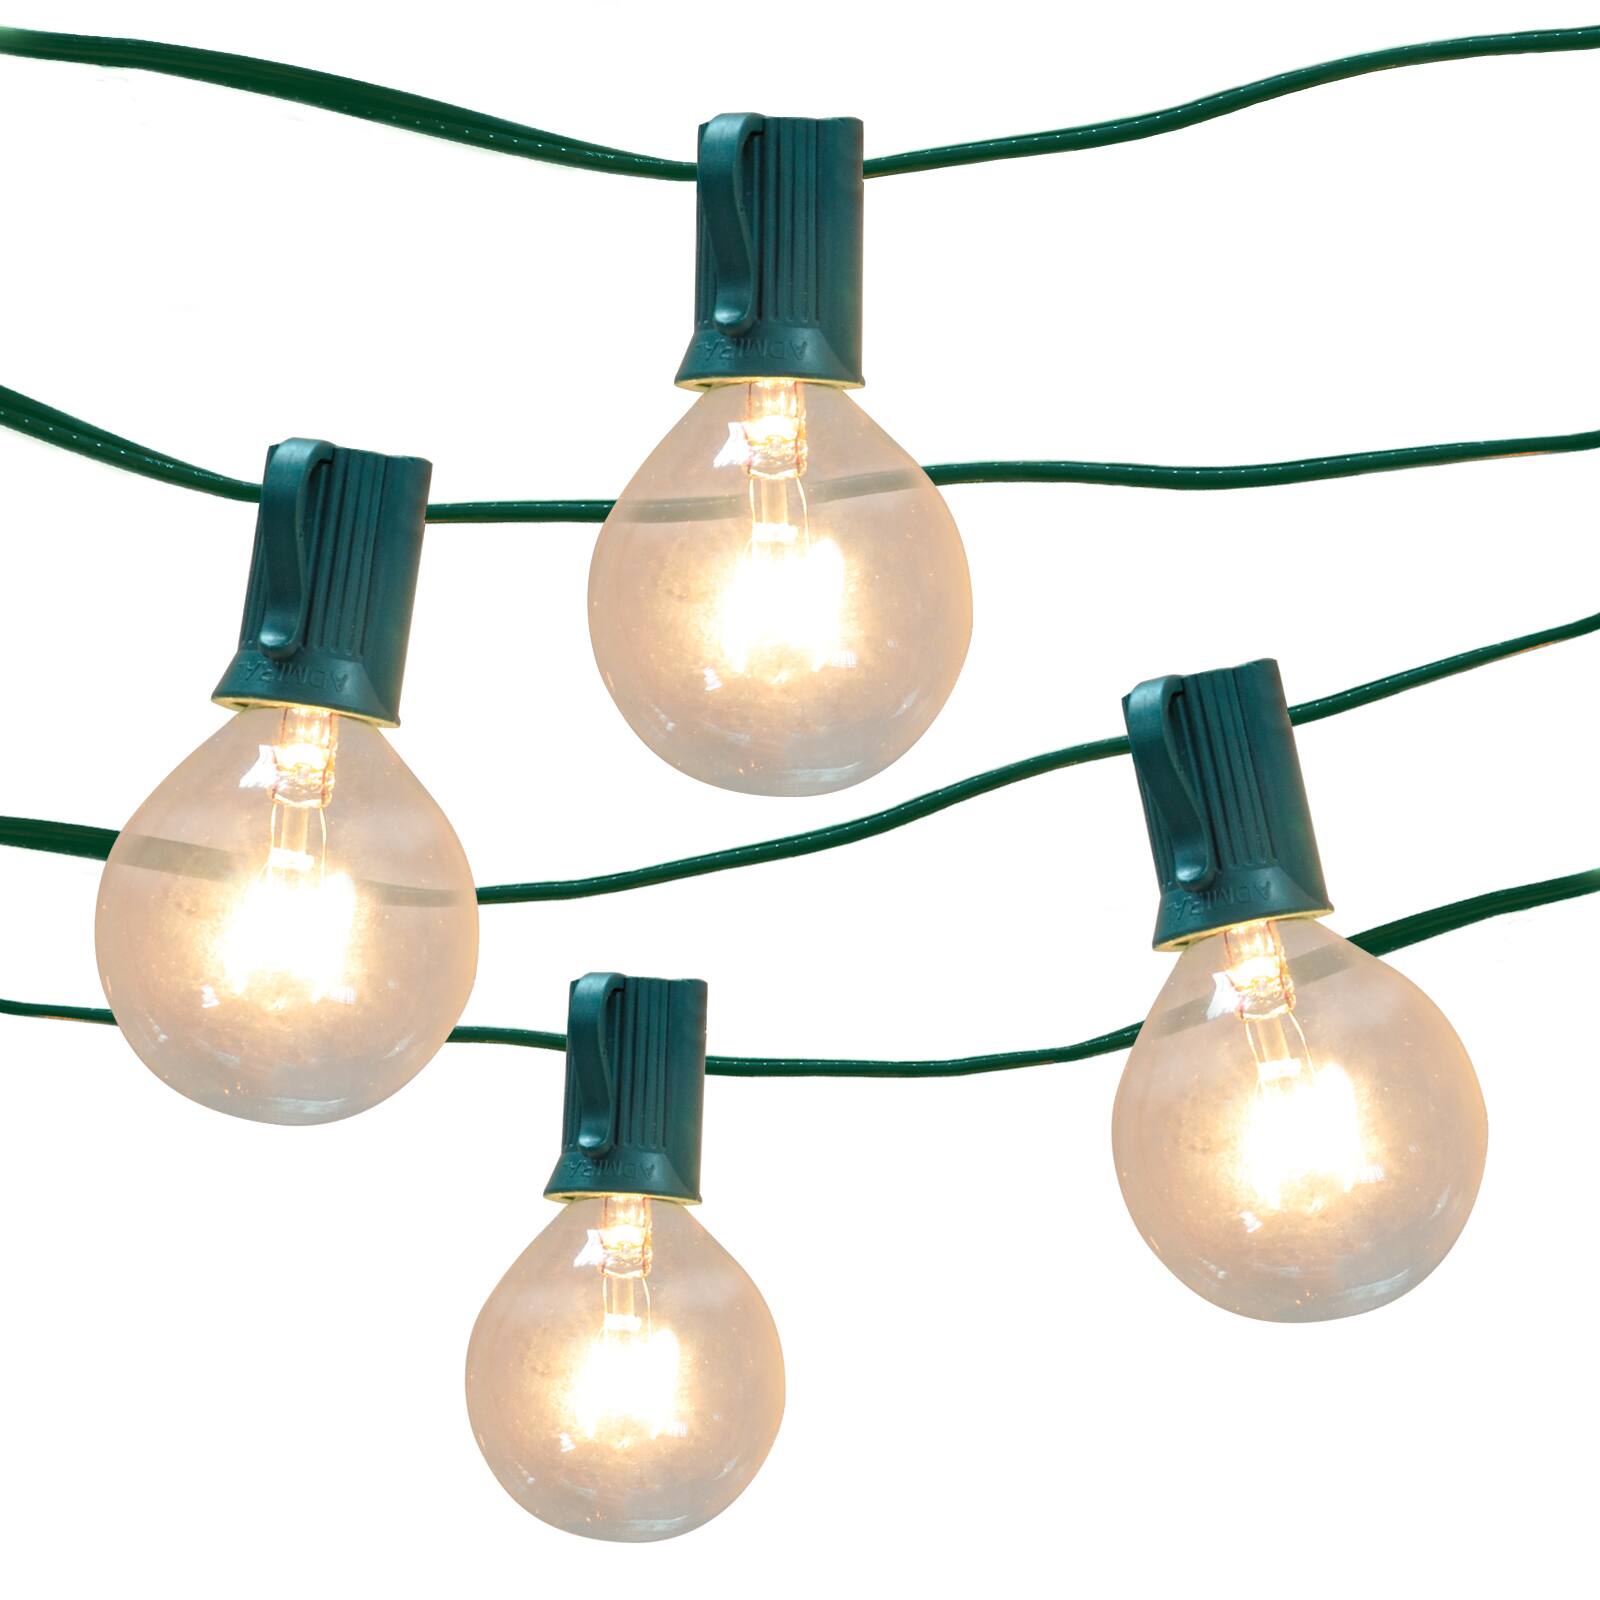 Shop for the Round G40 Bulb Light Set By Ashland™ at Michaels